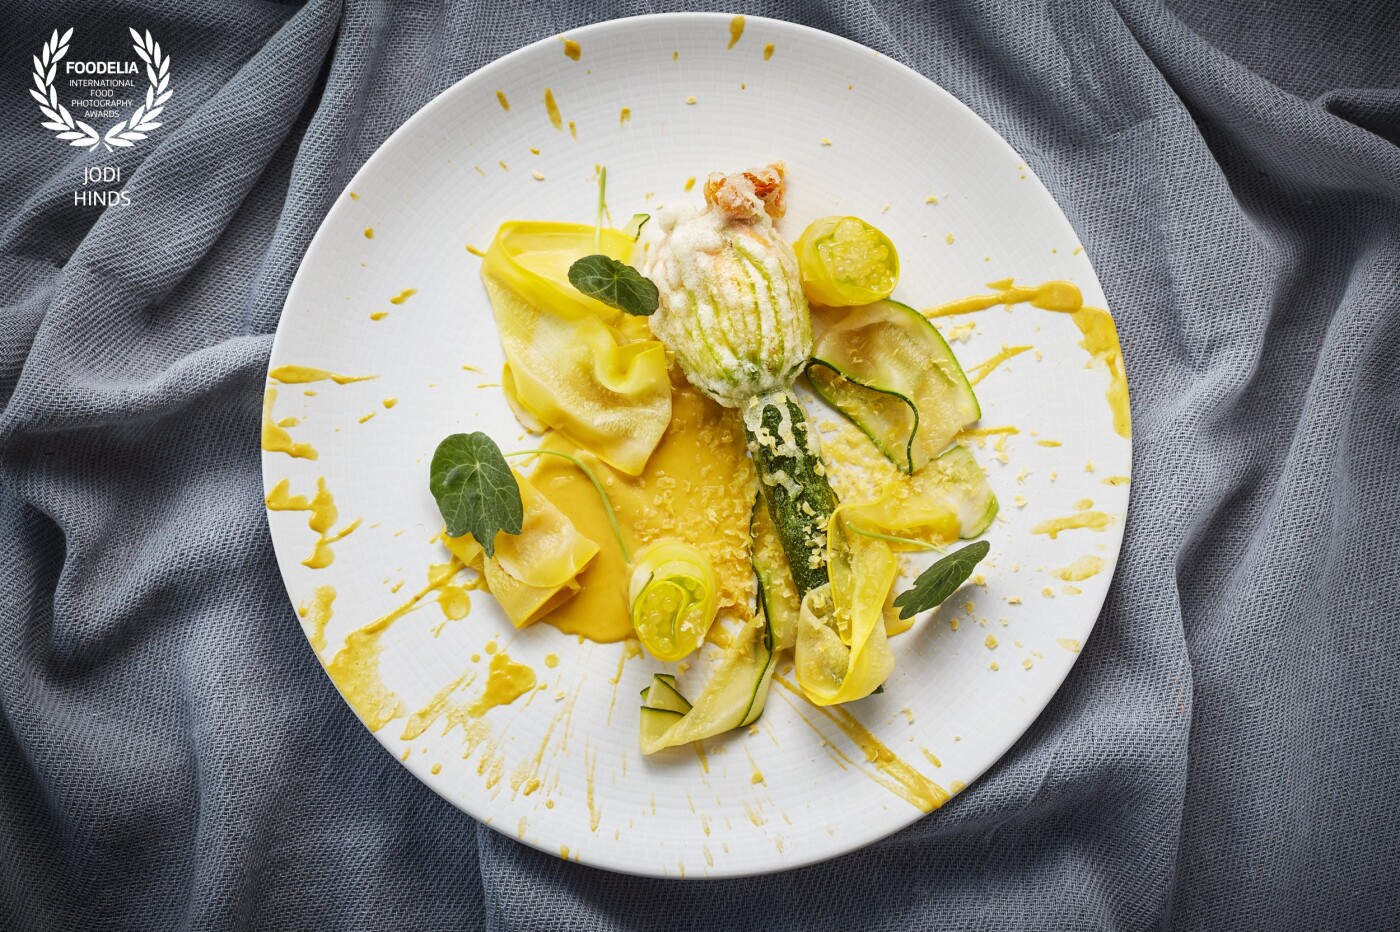 Another beautiful dish from Chef Mike Reid in the branding for their new Bar & Grill version of M.<br />
Courgettes slices here are so delicate and textured, we thought the best way to present it was against a similarly textural backdrop of grey linen.  <br />
<br />
Photographer: @jodihindsphoto<br />
Chef: @mikereidchef<br />
Restaurant: @mbarandgrill<br />
